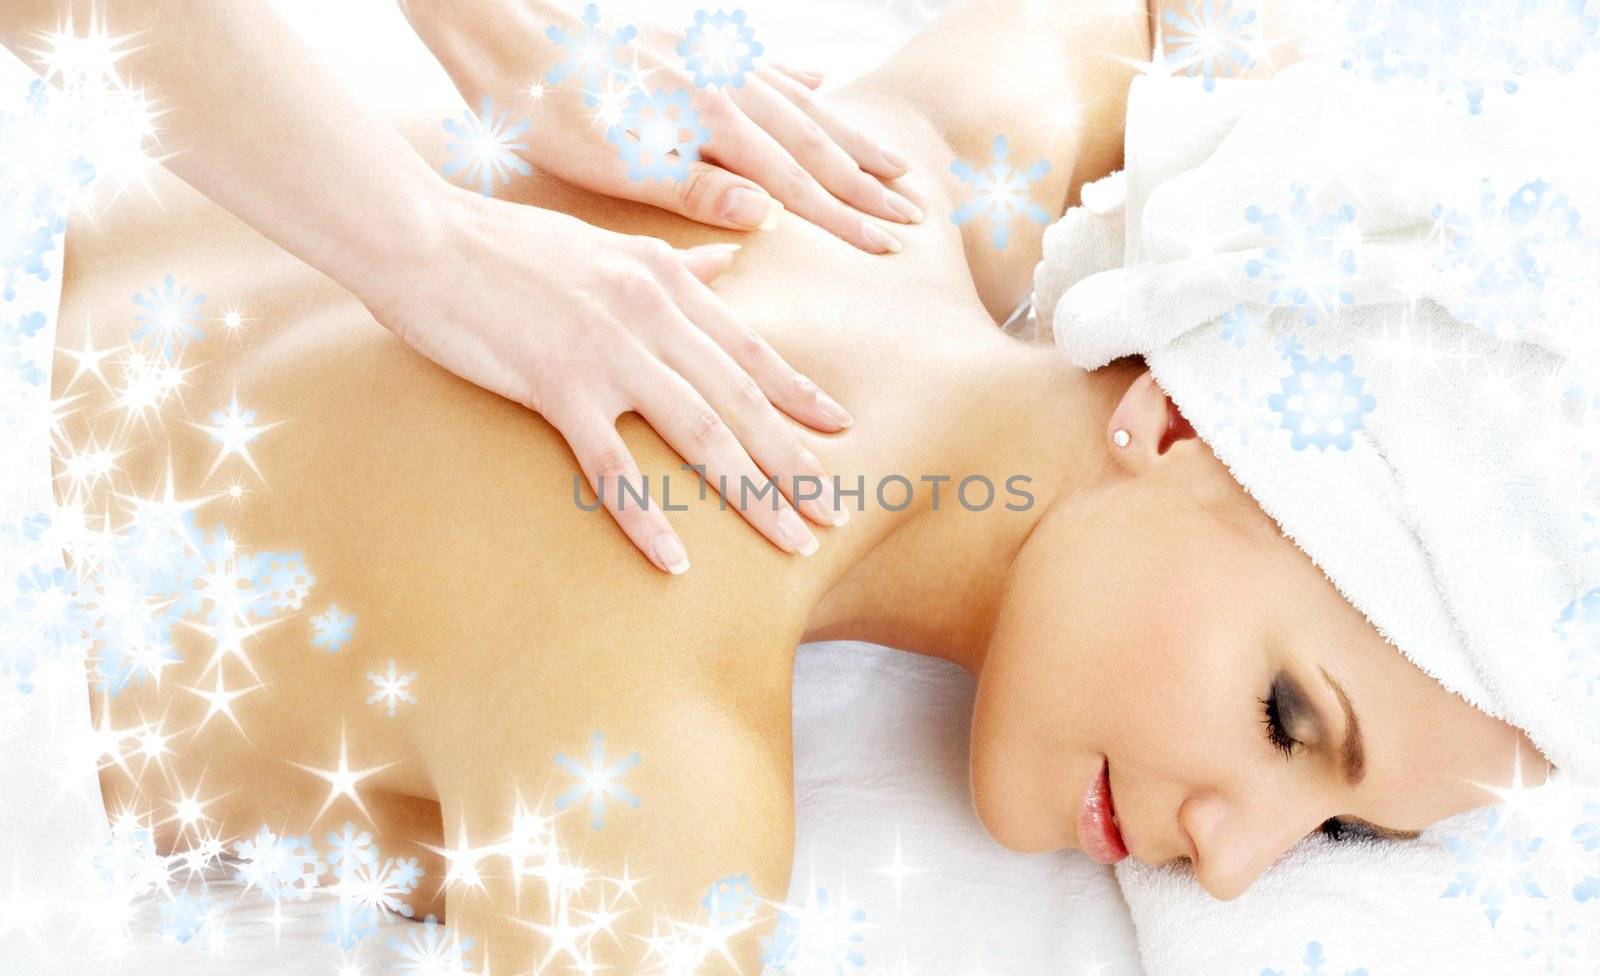 professional massage with snowflakes #2 by dolgachov